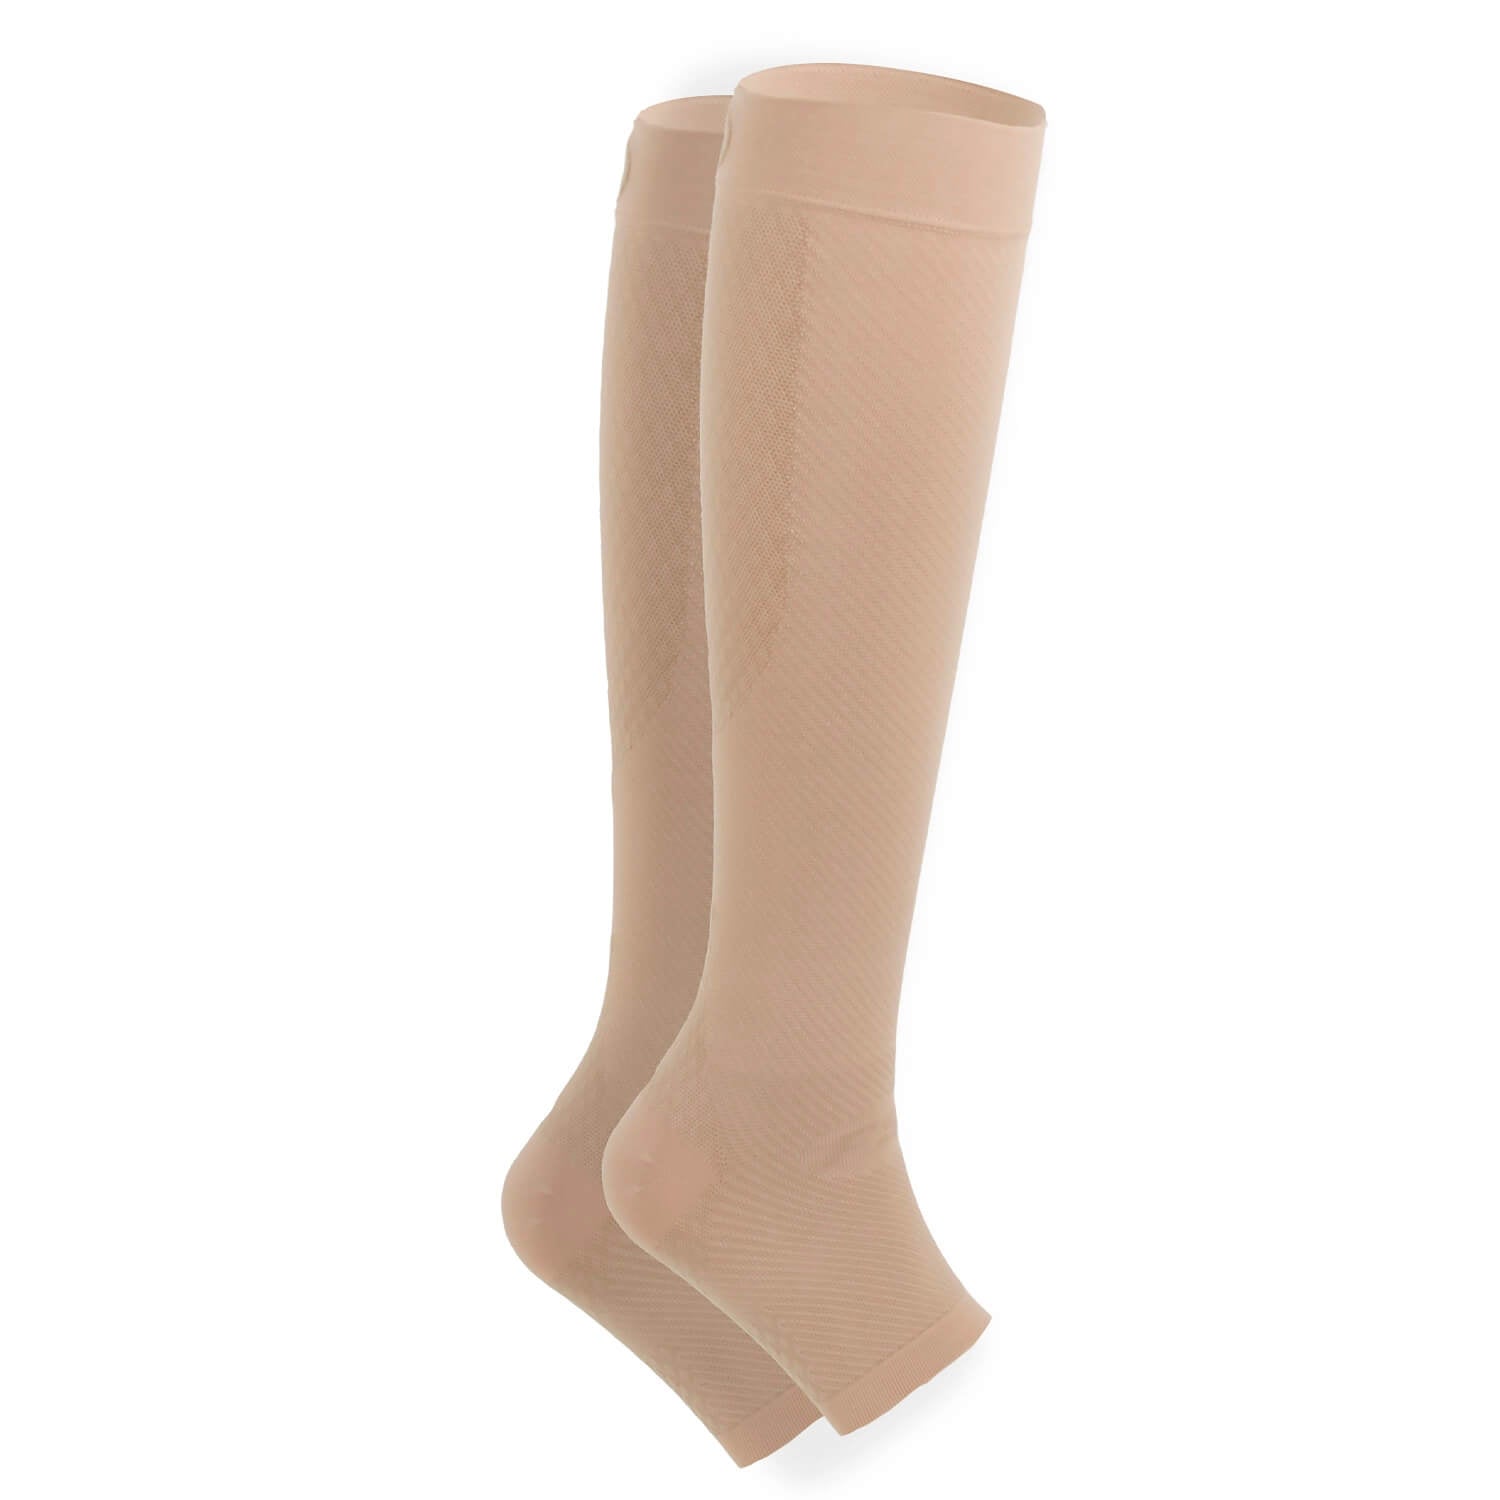 Compression Socks - Relief for Fatigued Legs - Cambivo